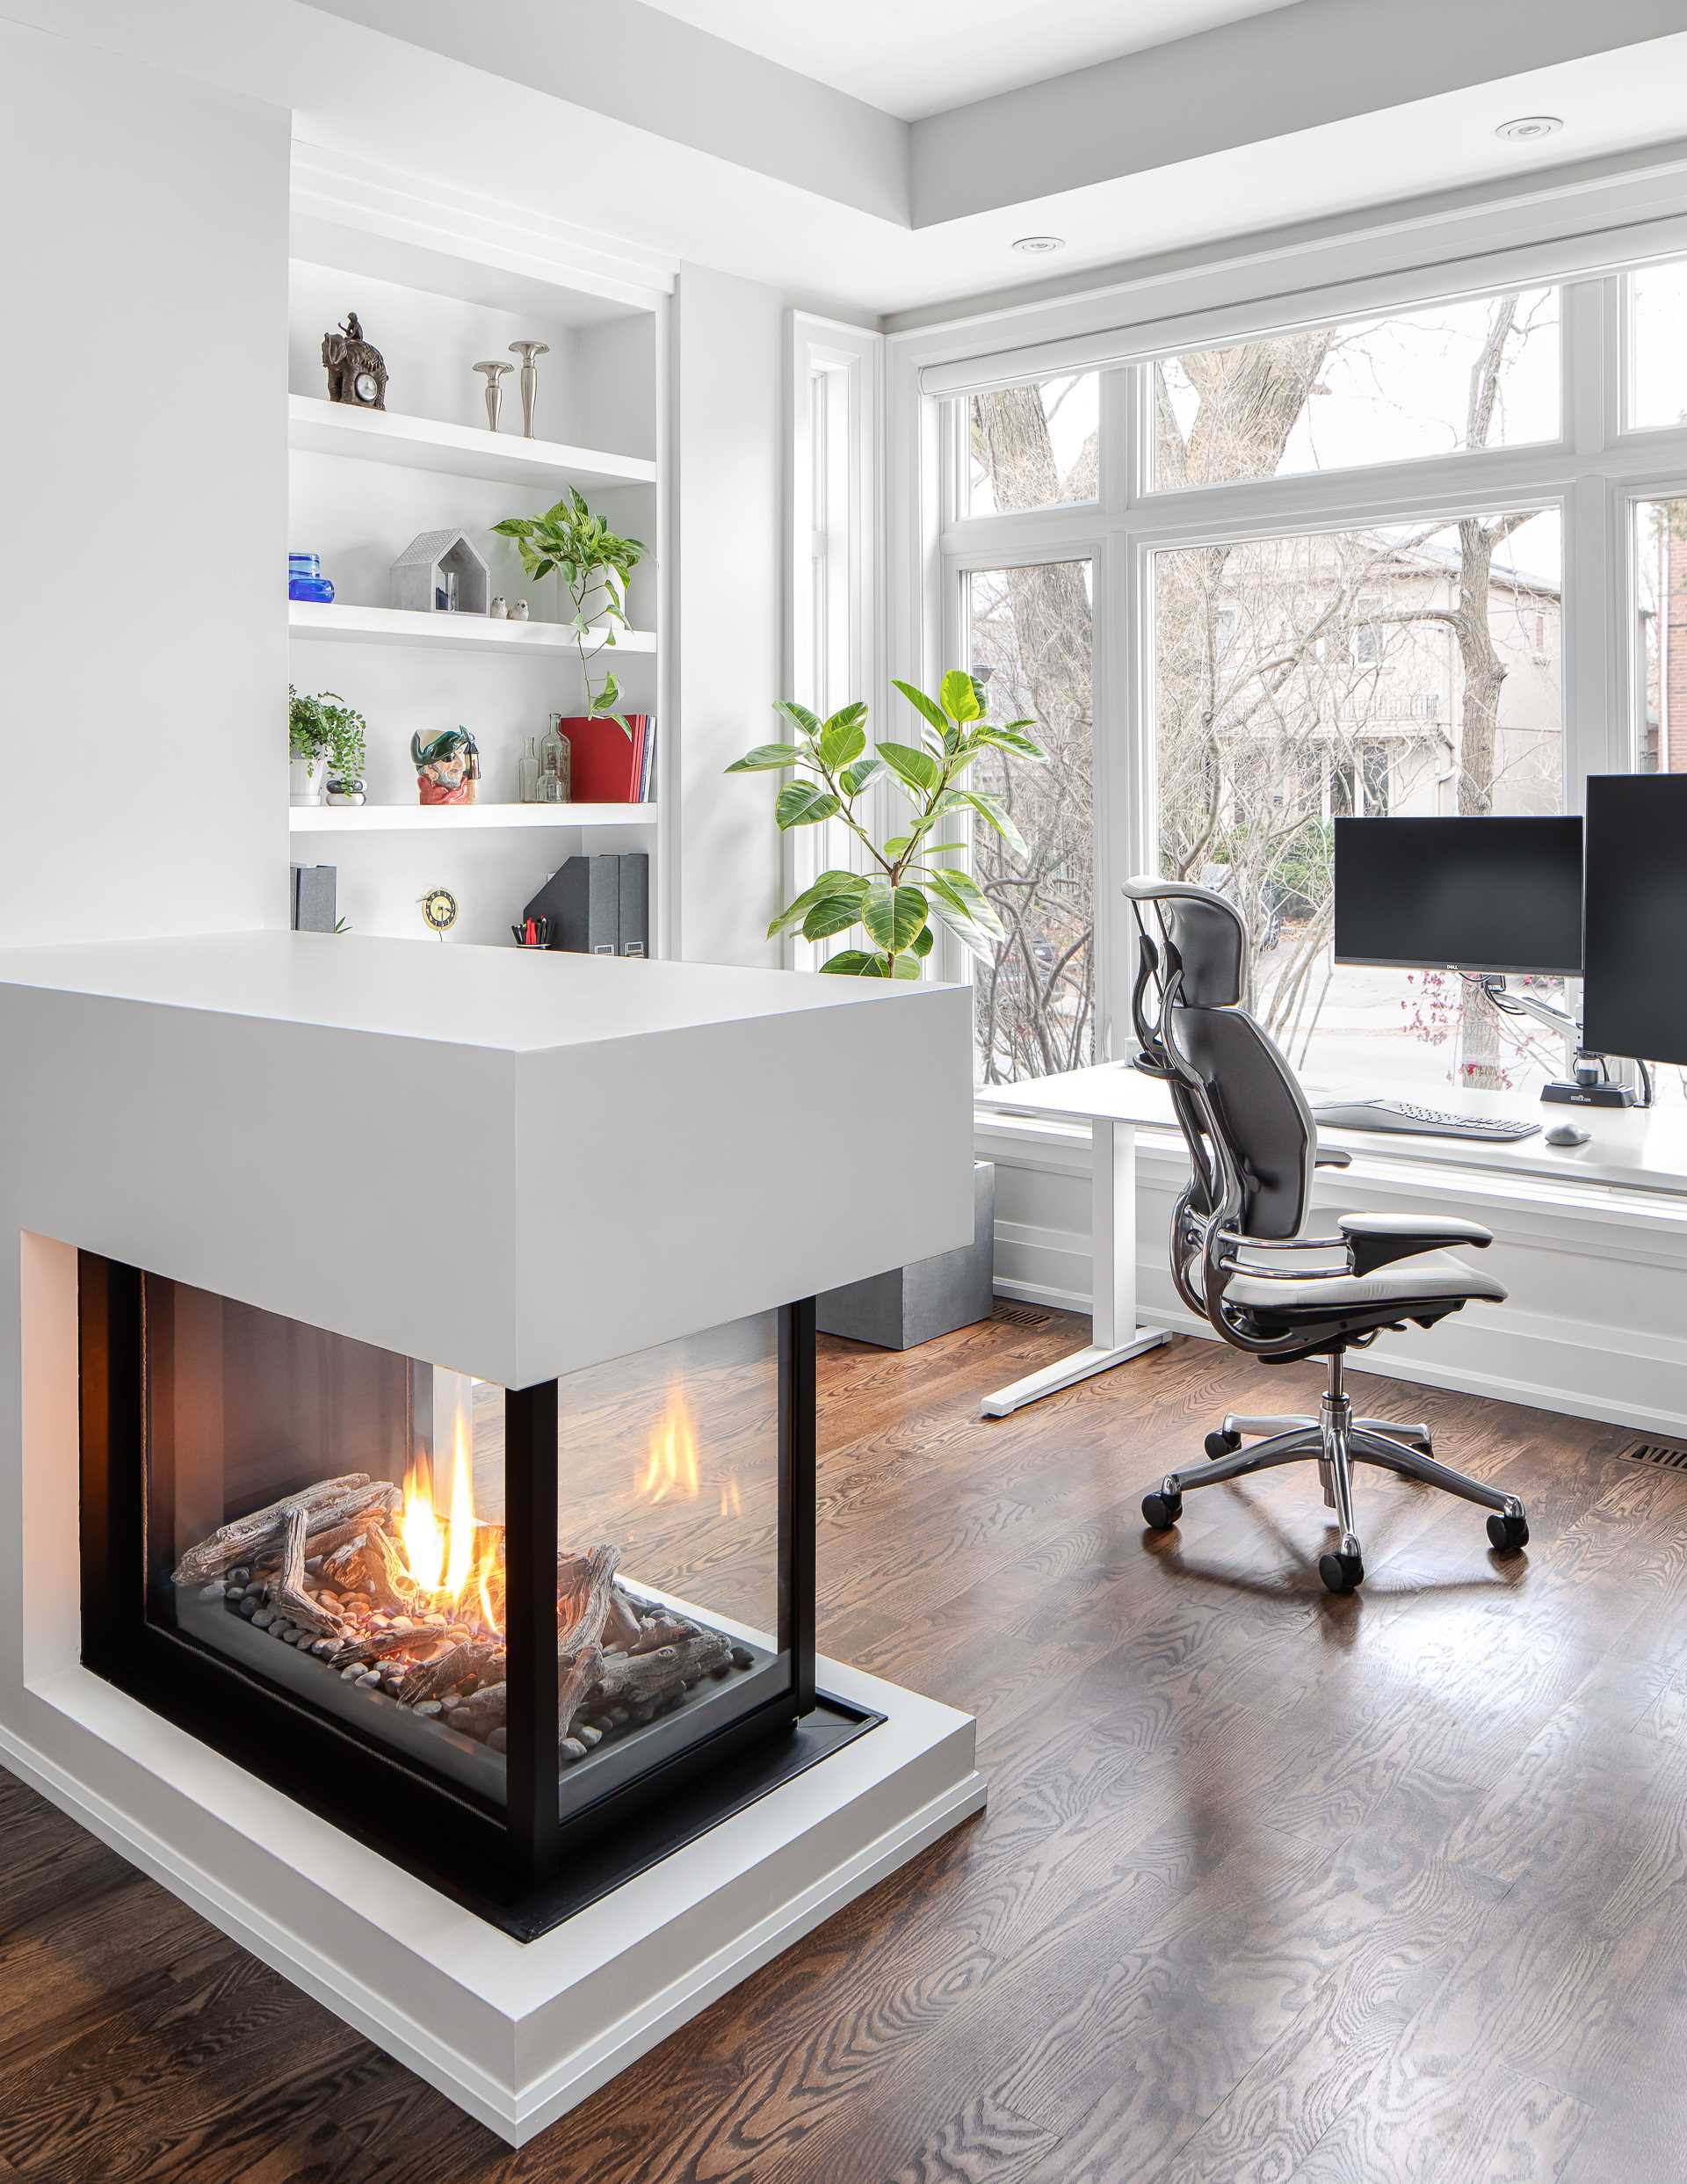 A low three-sided fireplace acts as a room divider separated the living room from the home office.